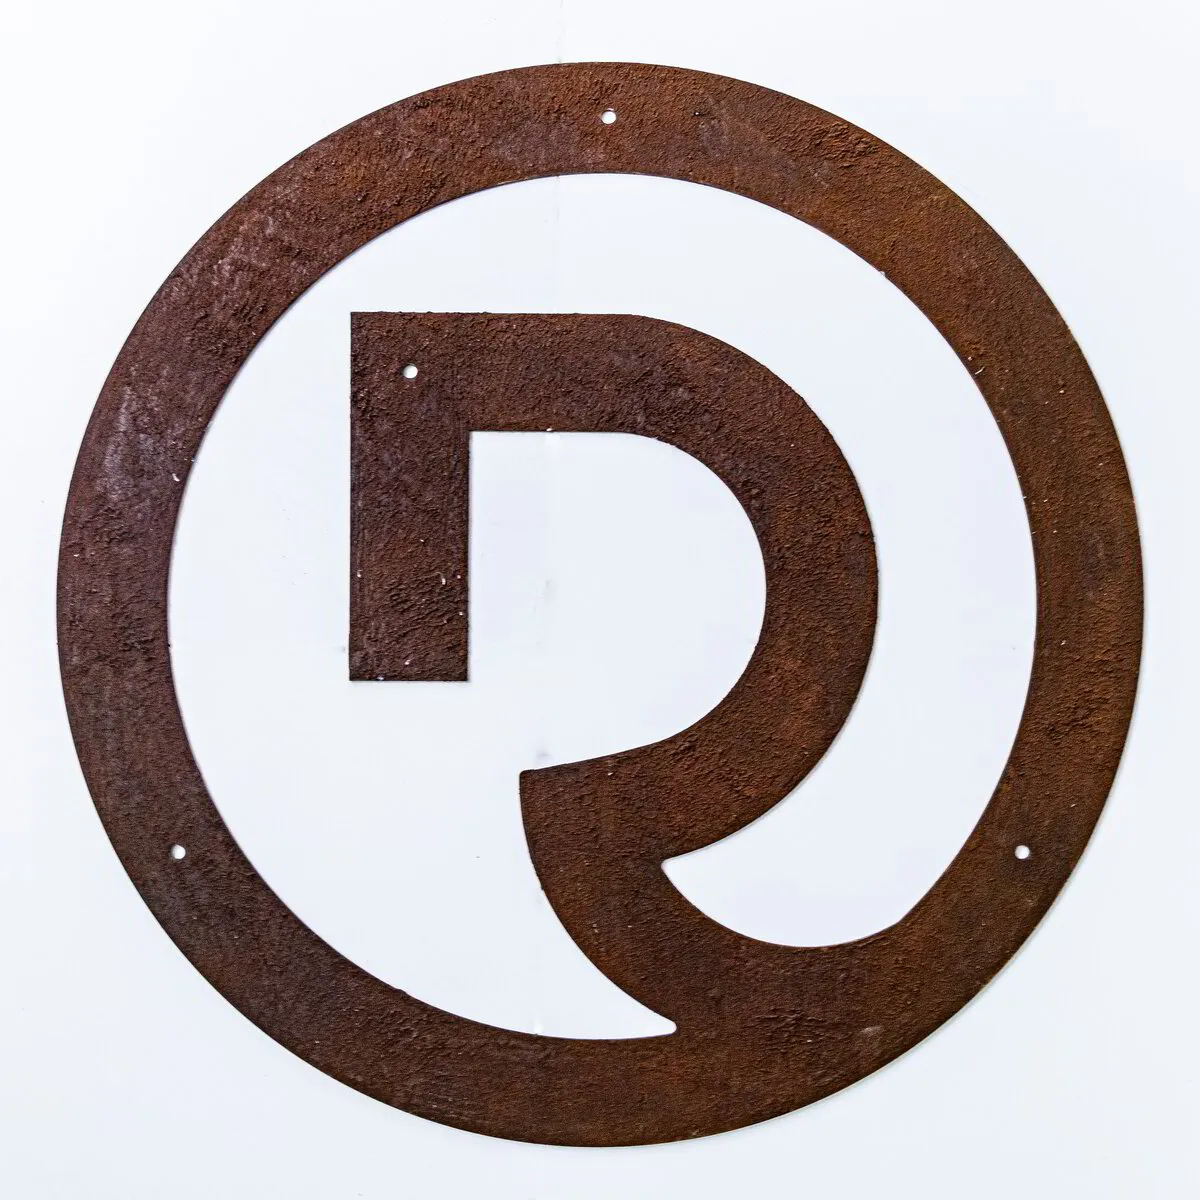 Rusted R Signage